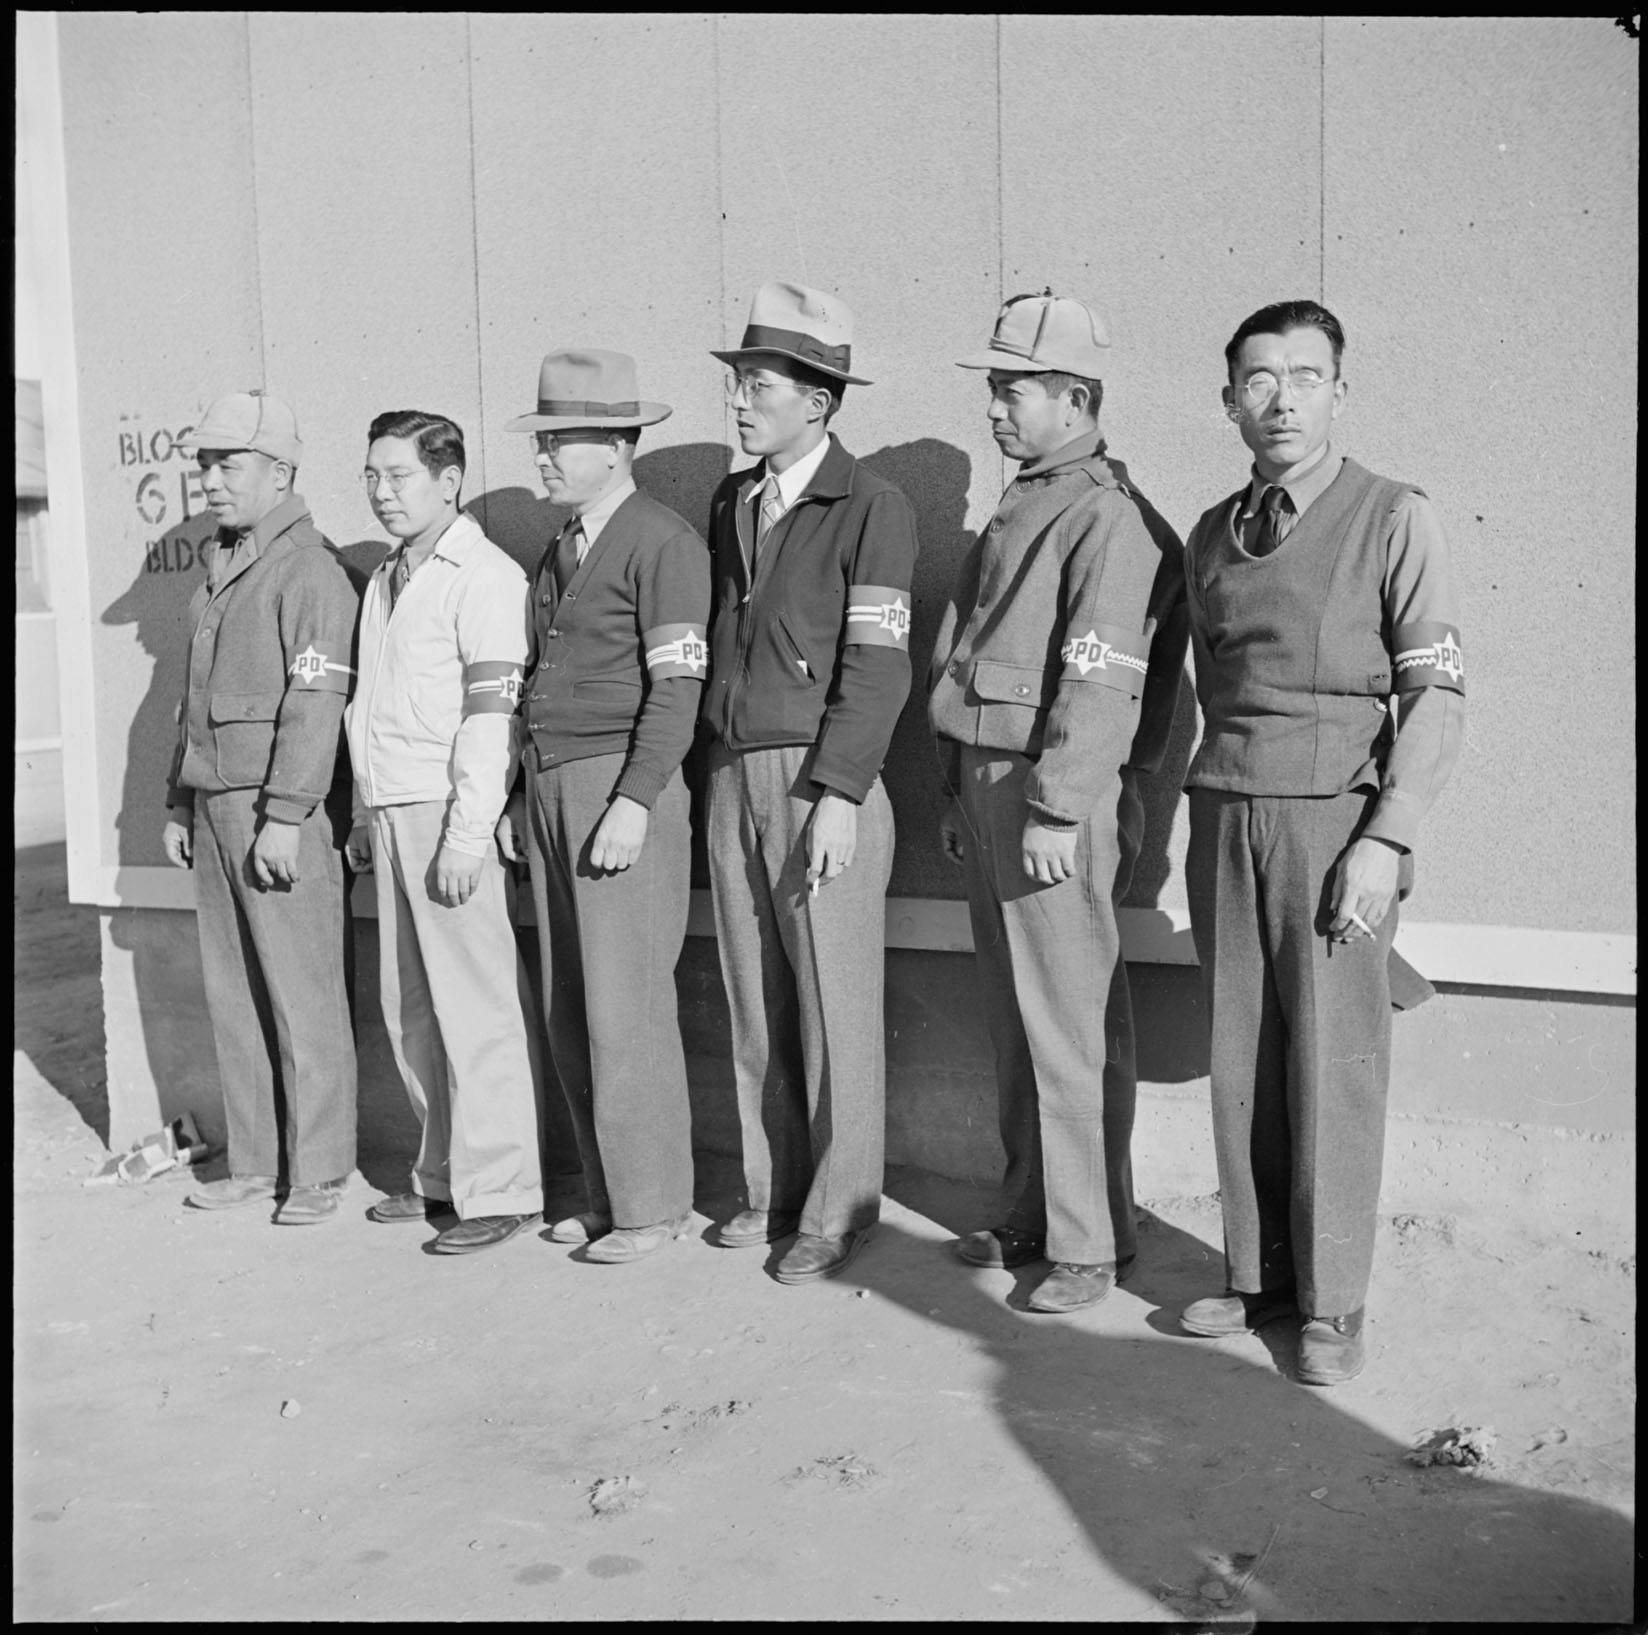 Japanese interment camp detainees wearing identification arm bands